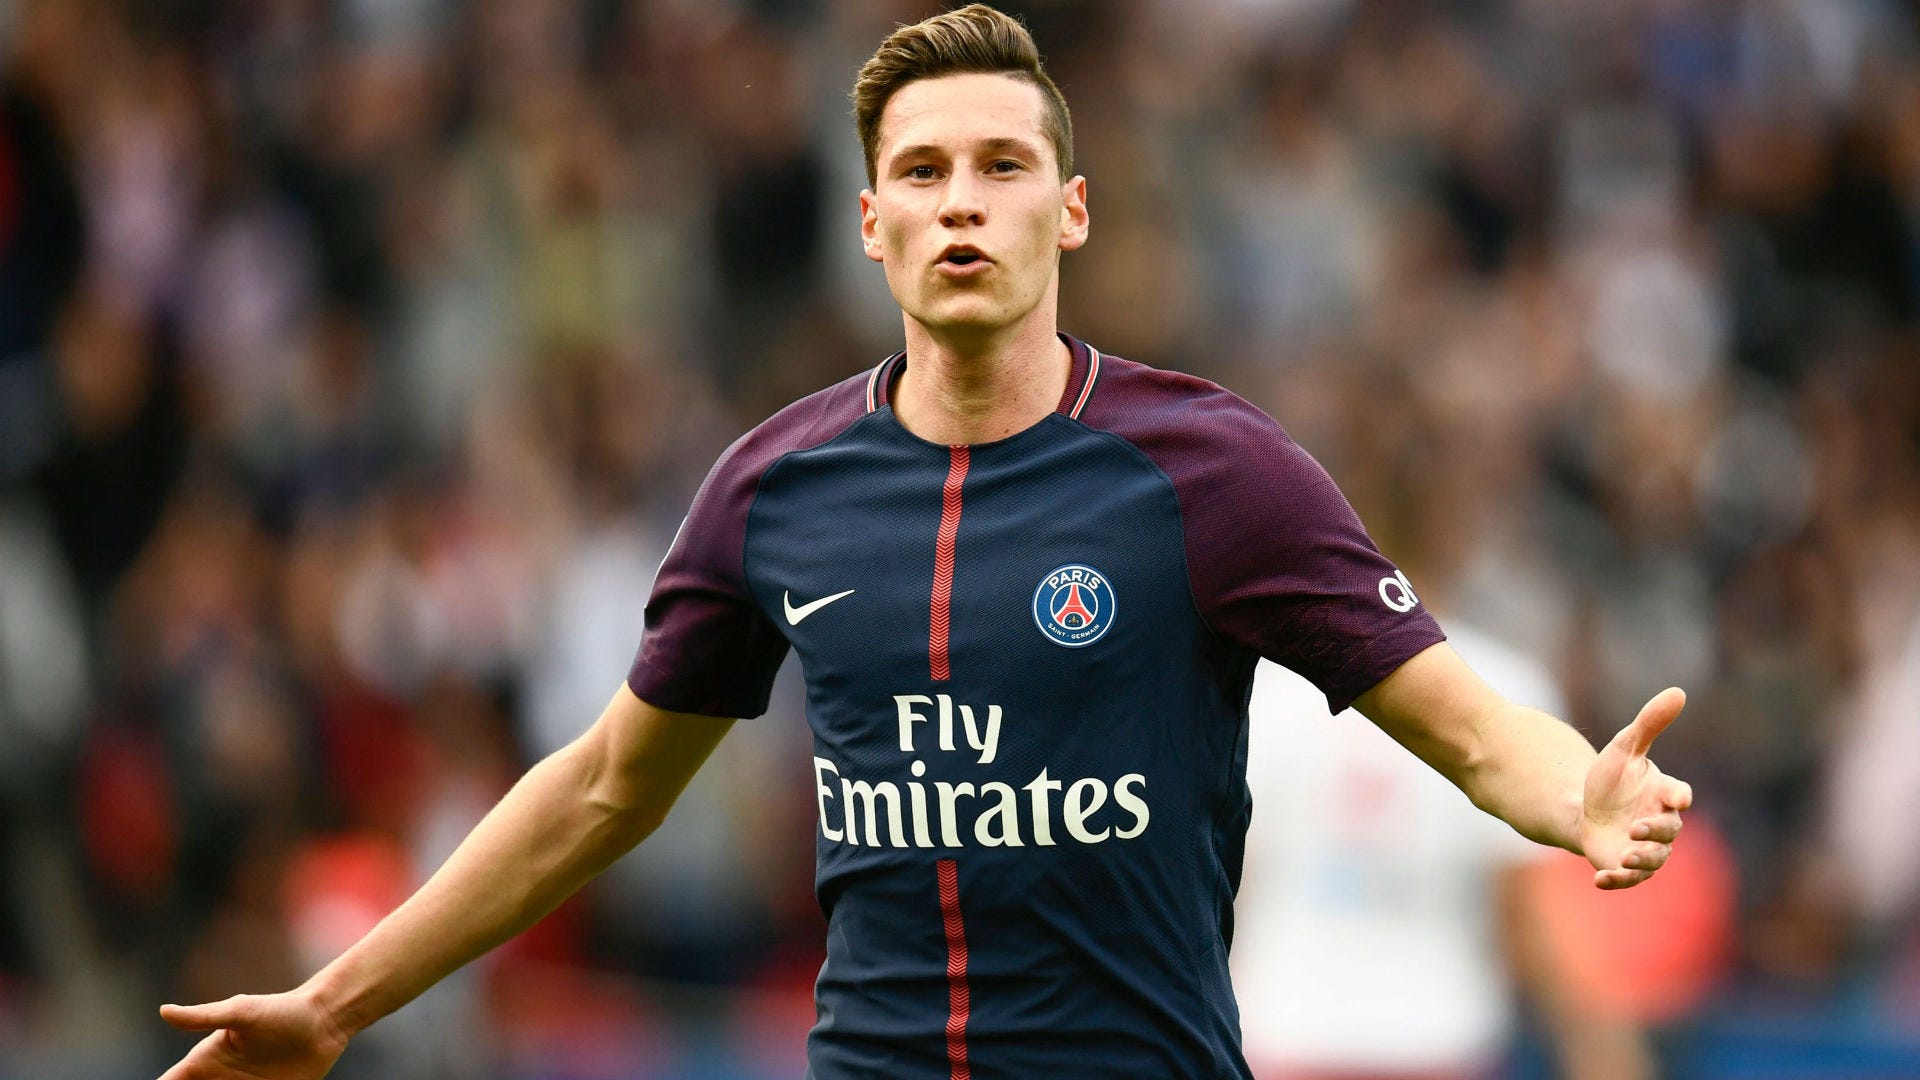 Champions League: Julian Draxler is the best reserve in the world right now - can PSG keep him happy? | Goal.com Australia